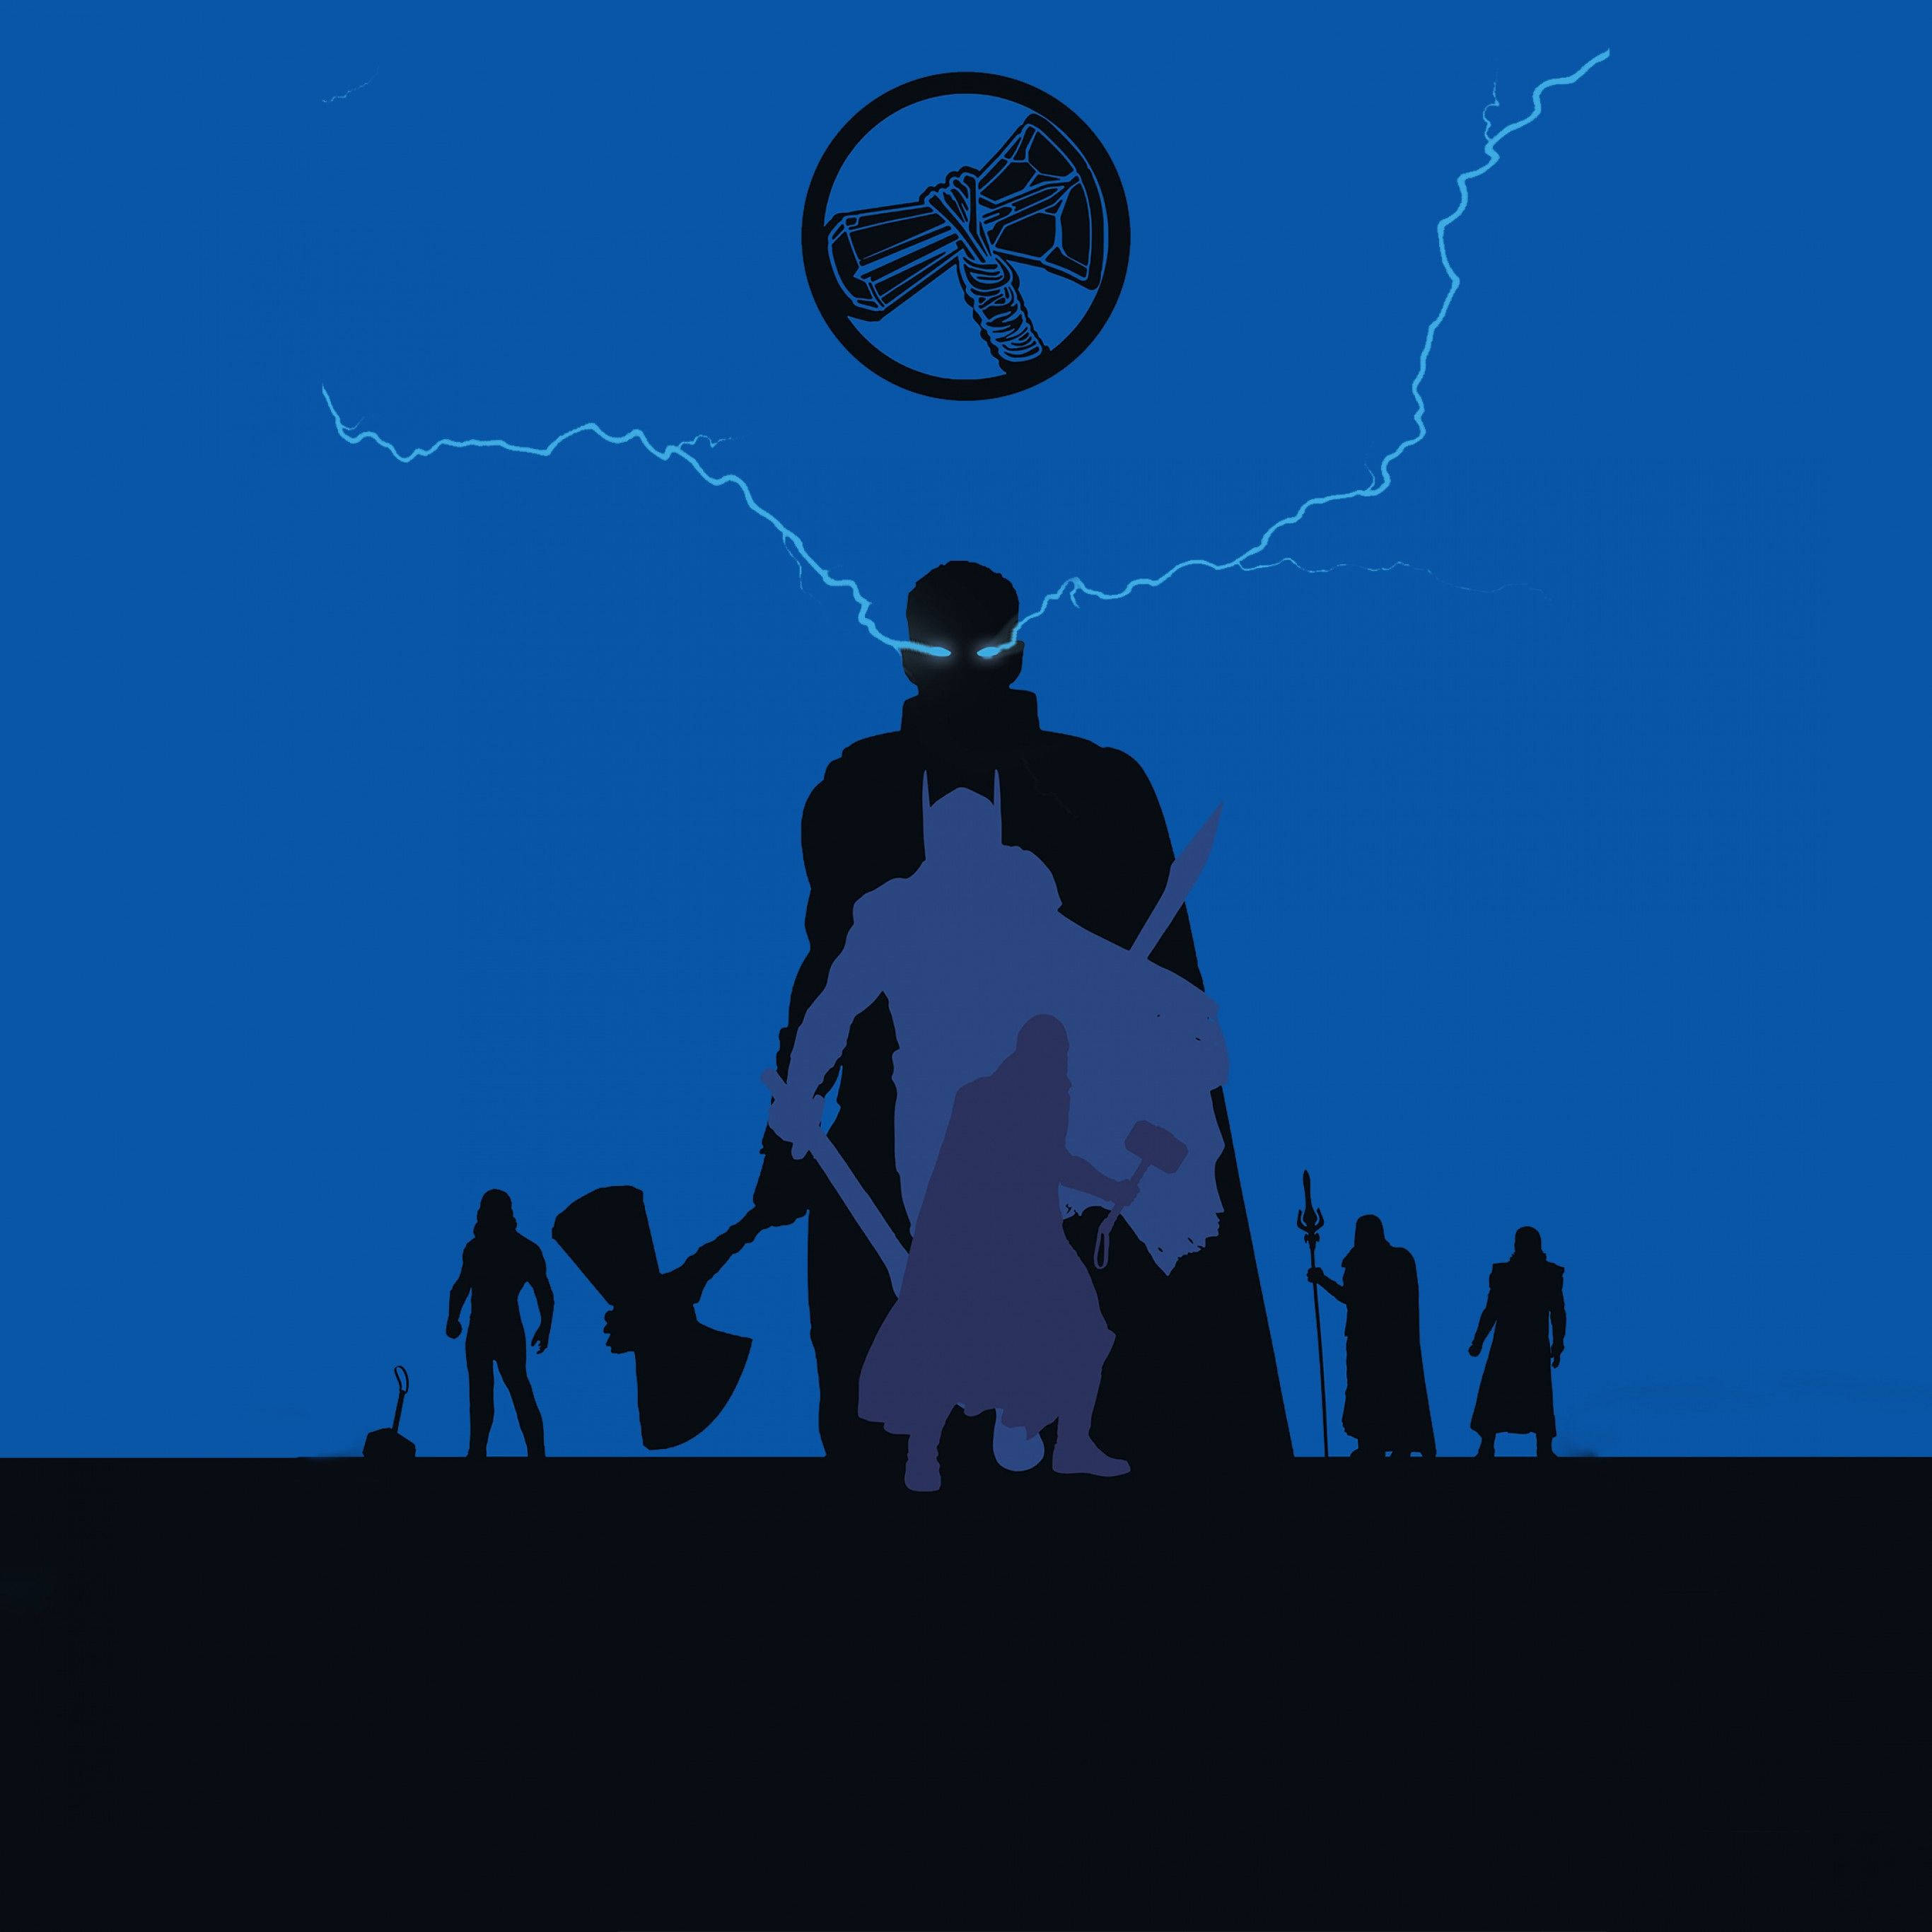 Thor Stormbreaker And Weapons Silhouette Wallpaper